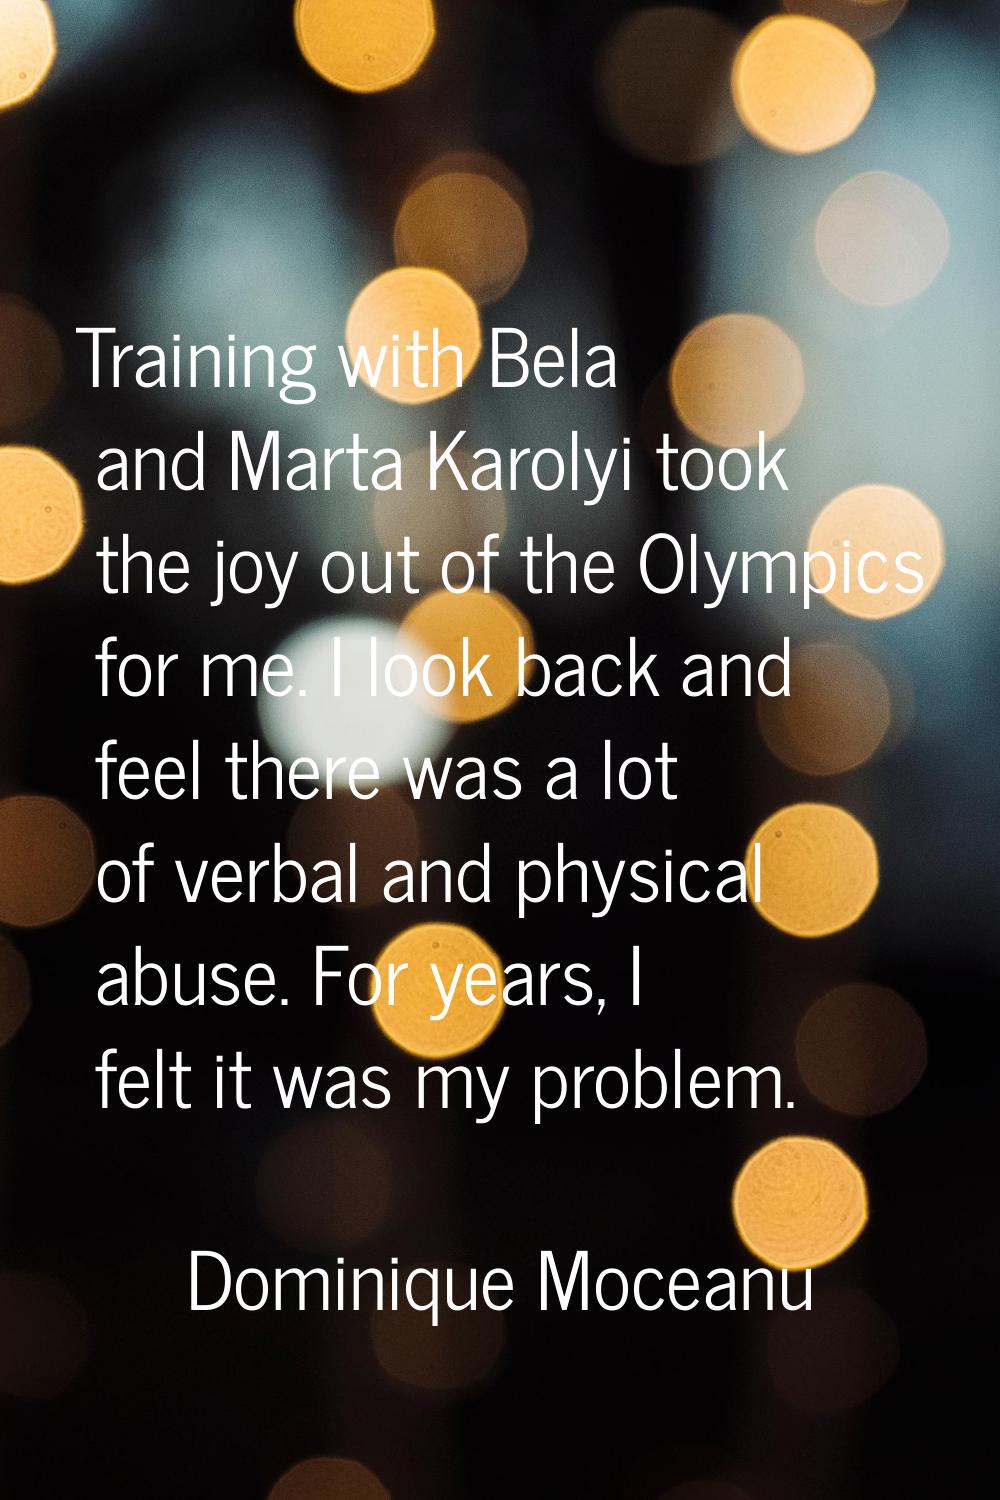 Training with Bela and Marta Karolyi took the joy out of the Olympics for me. I look back and feel 